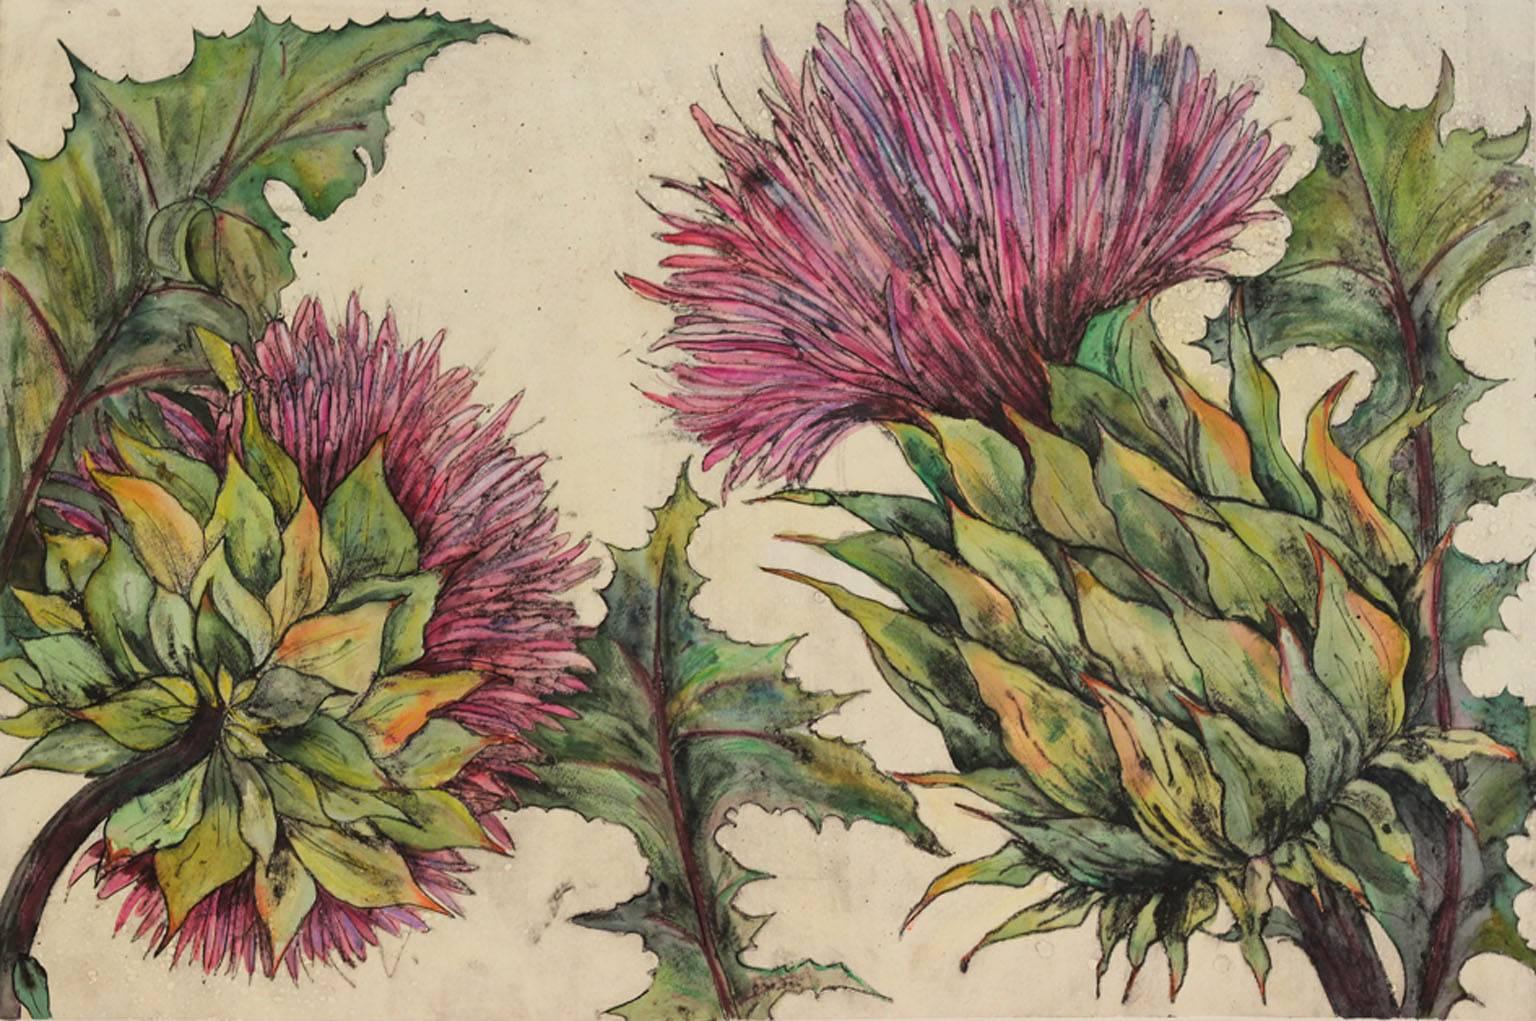 Vicky Oldfield Landscape Print - Cardoon, still life, nature, flower, limited edition print